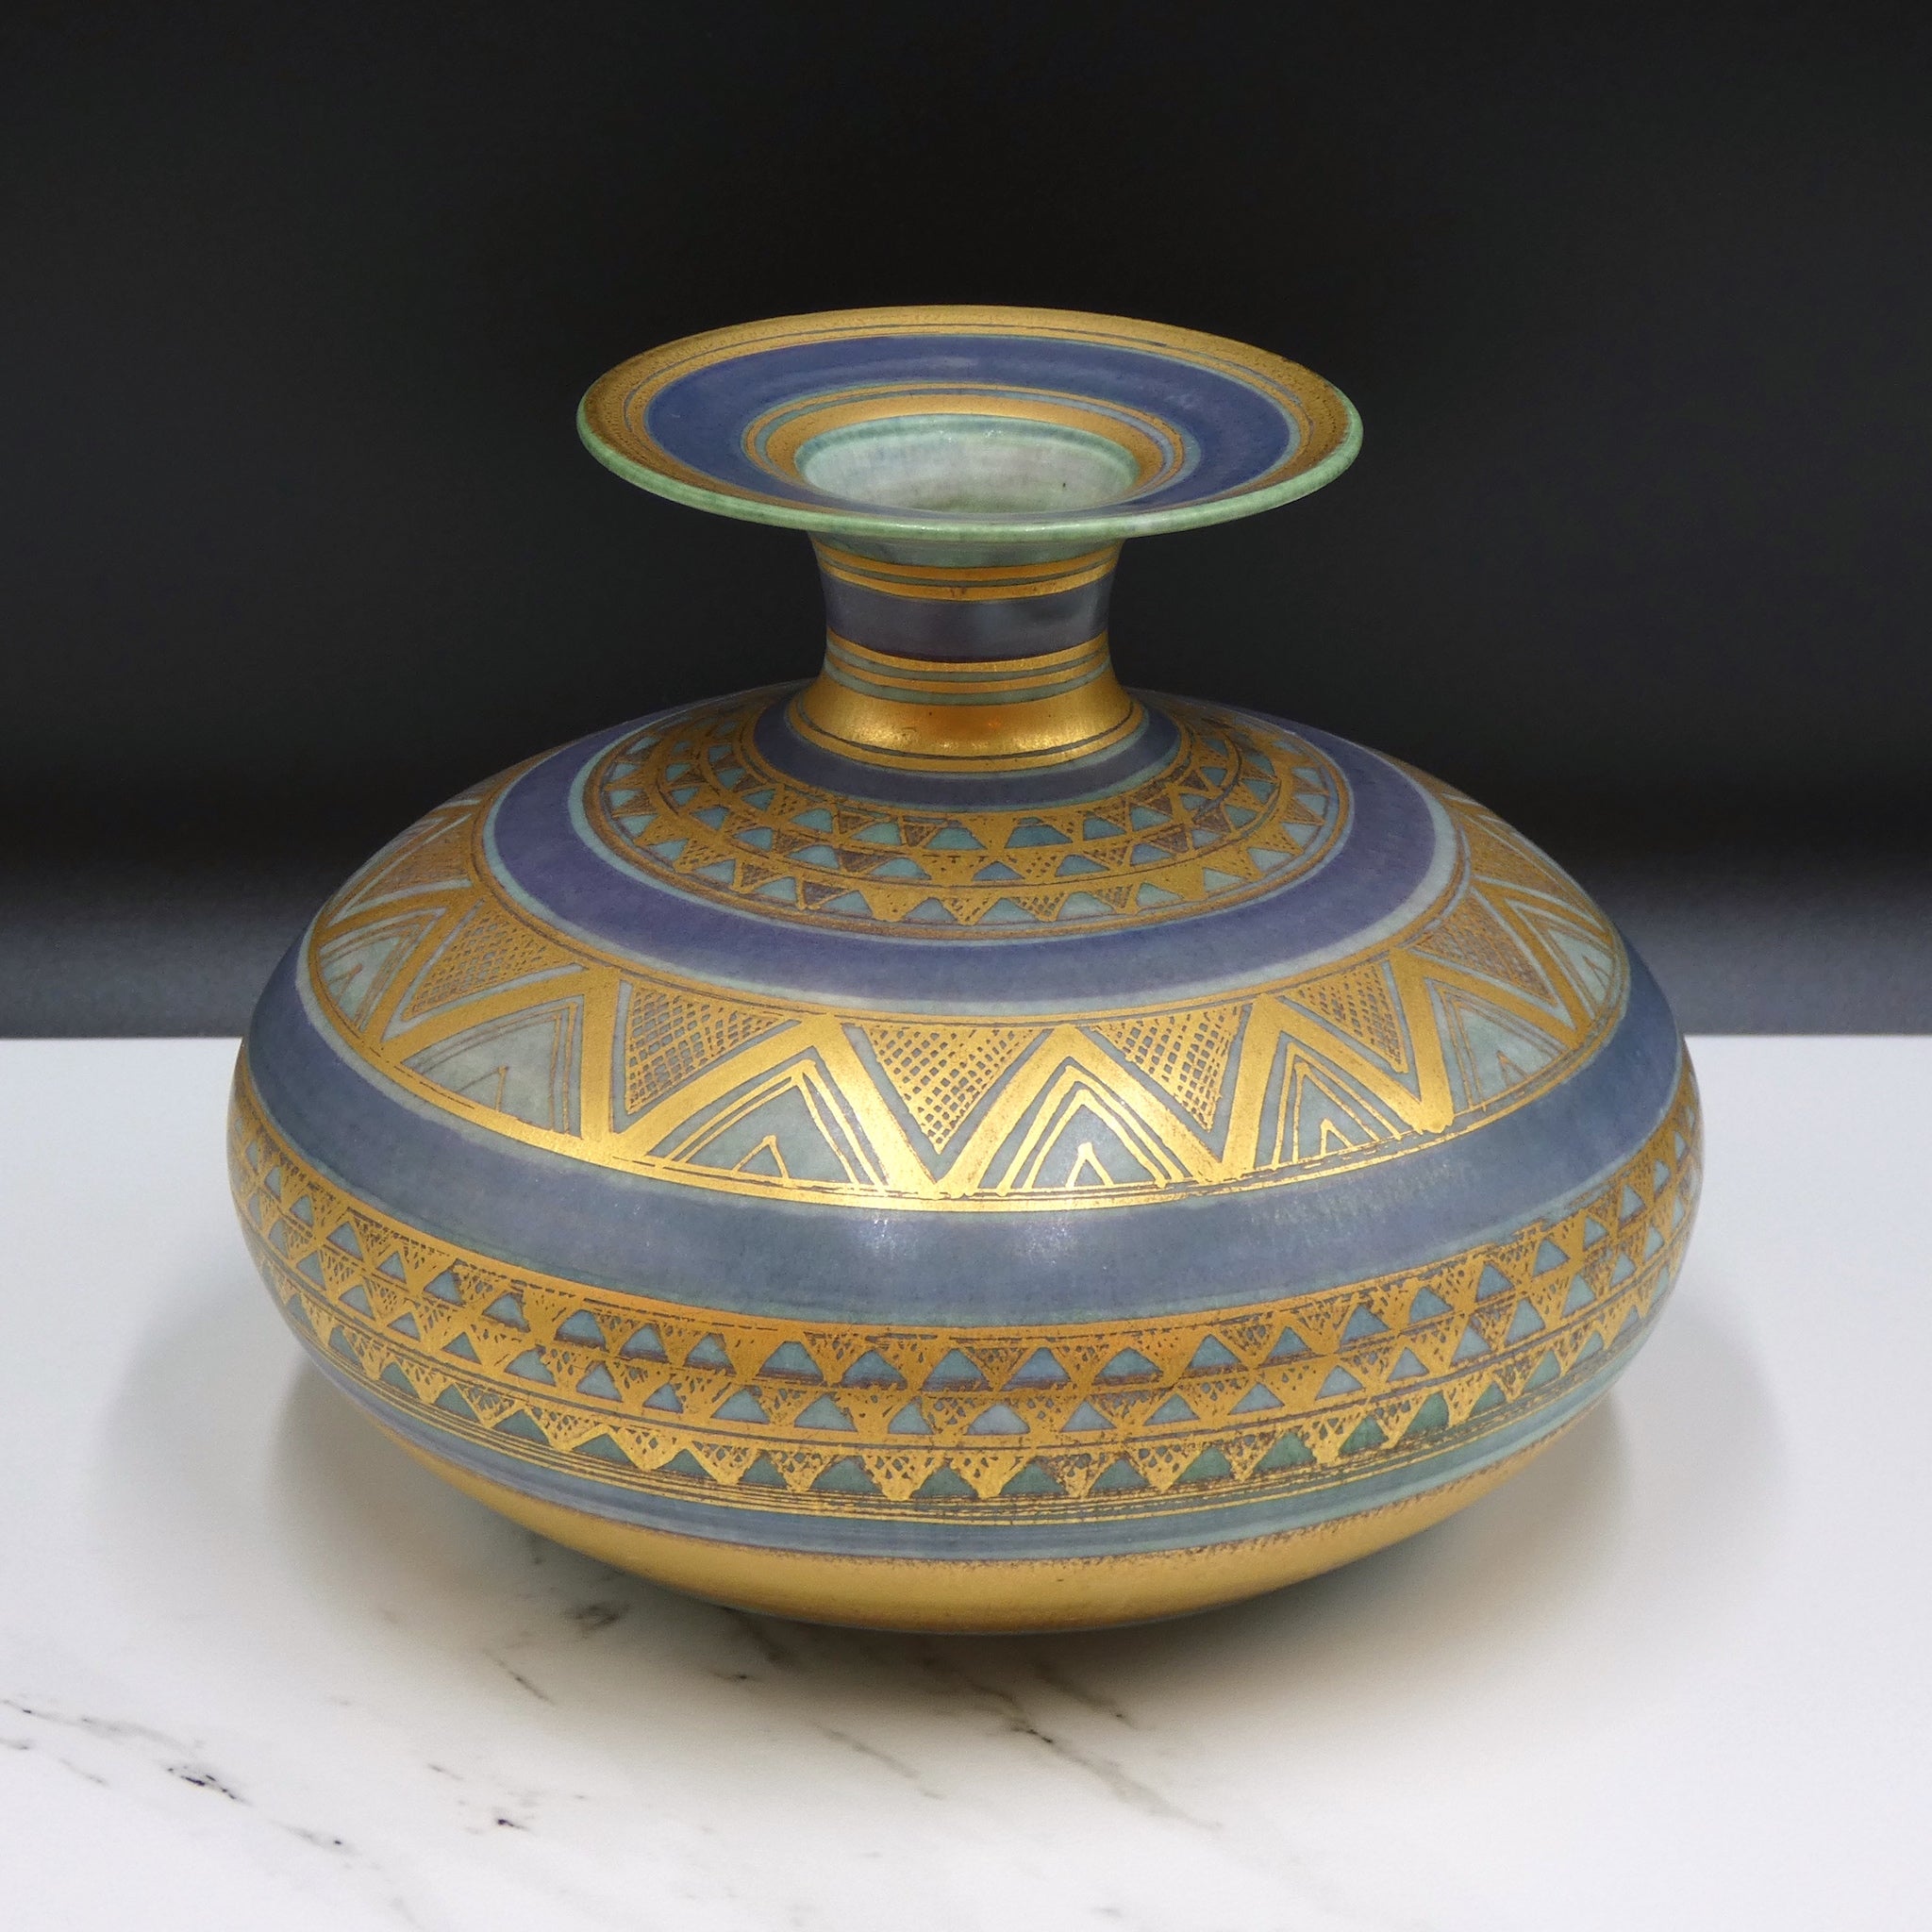 Wheel thrown porcelain with gold lustre by potter Mary Rich